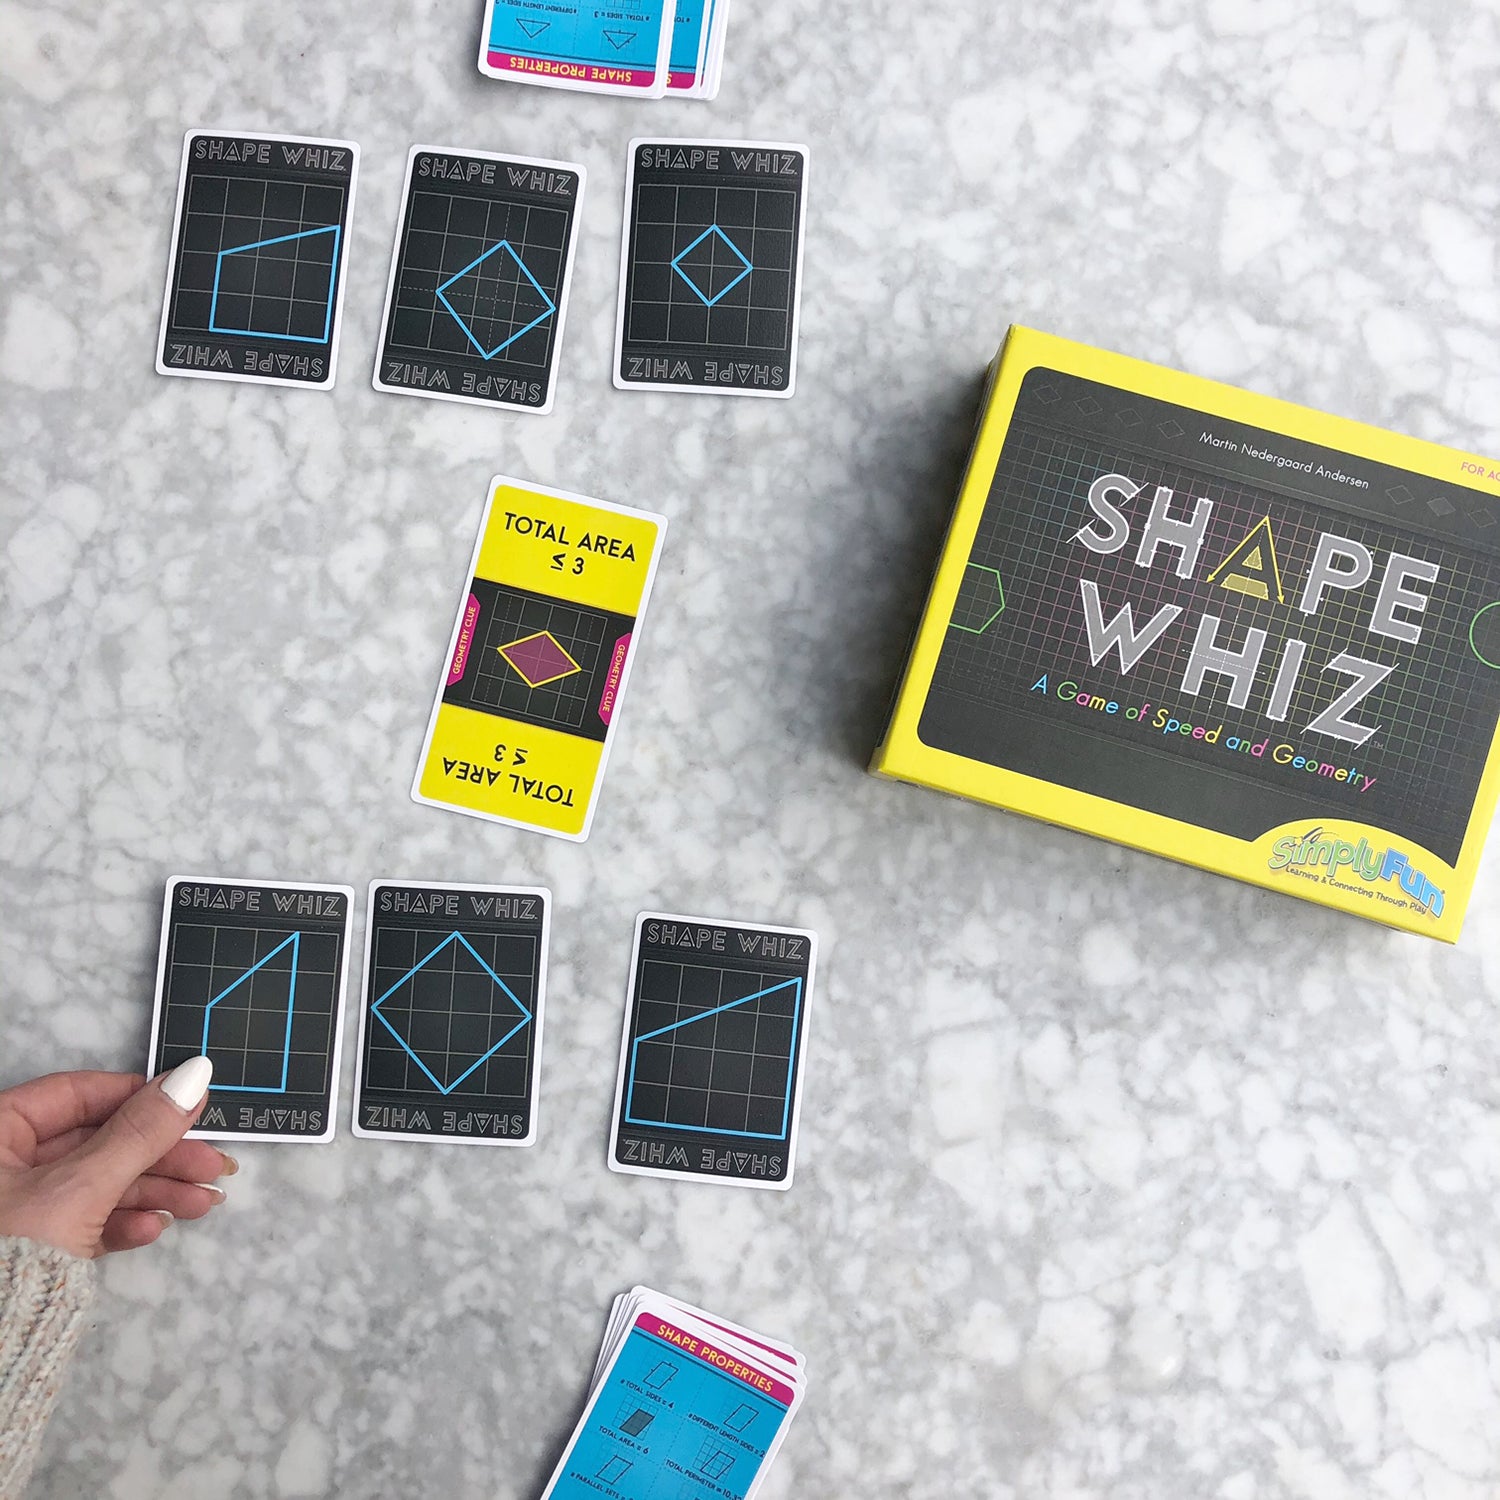 Shape Whiz by SimplyFun is a fun geometry game and measurement game for ages 10 and up.